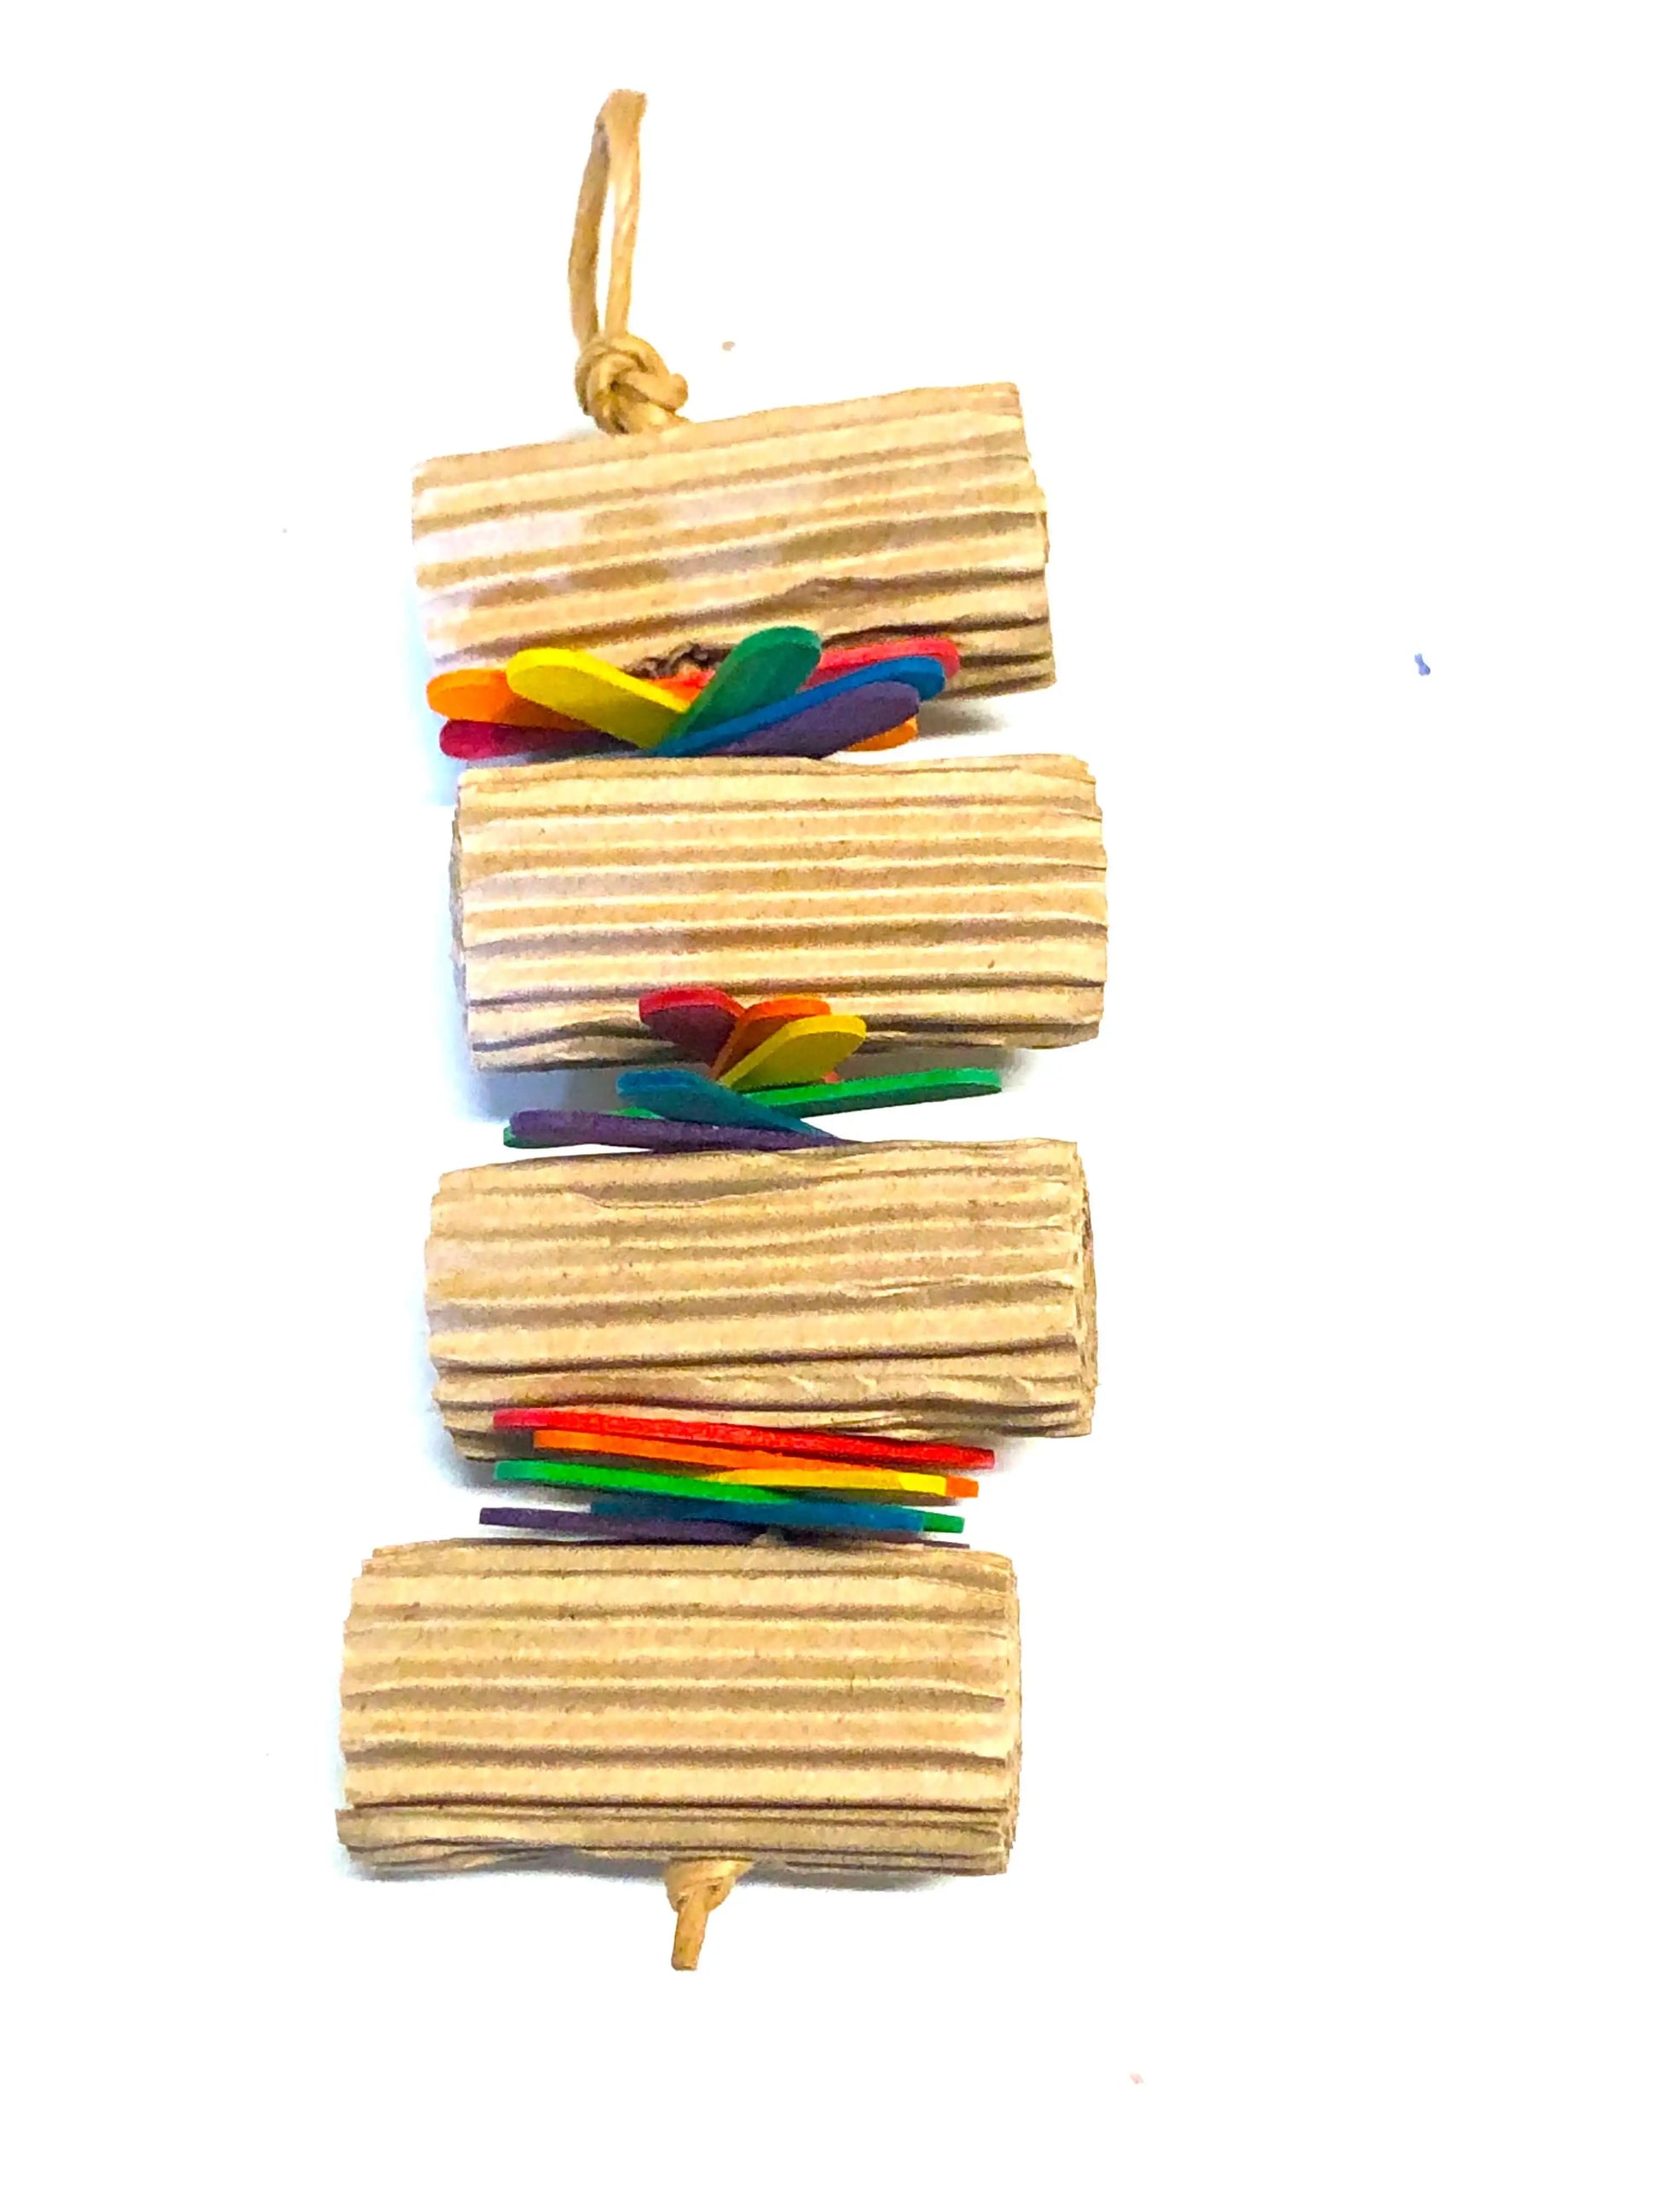 shreddable roll of cardboard bird toy with popsicle sticks